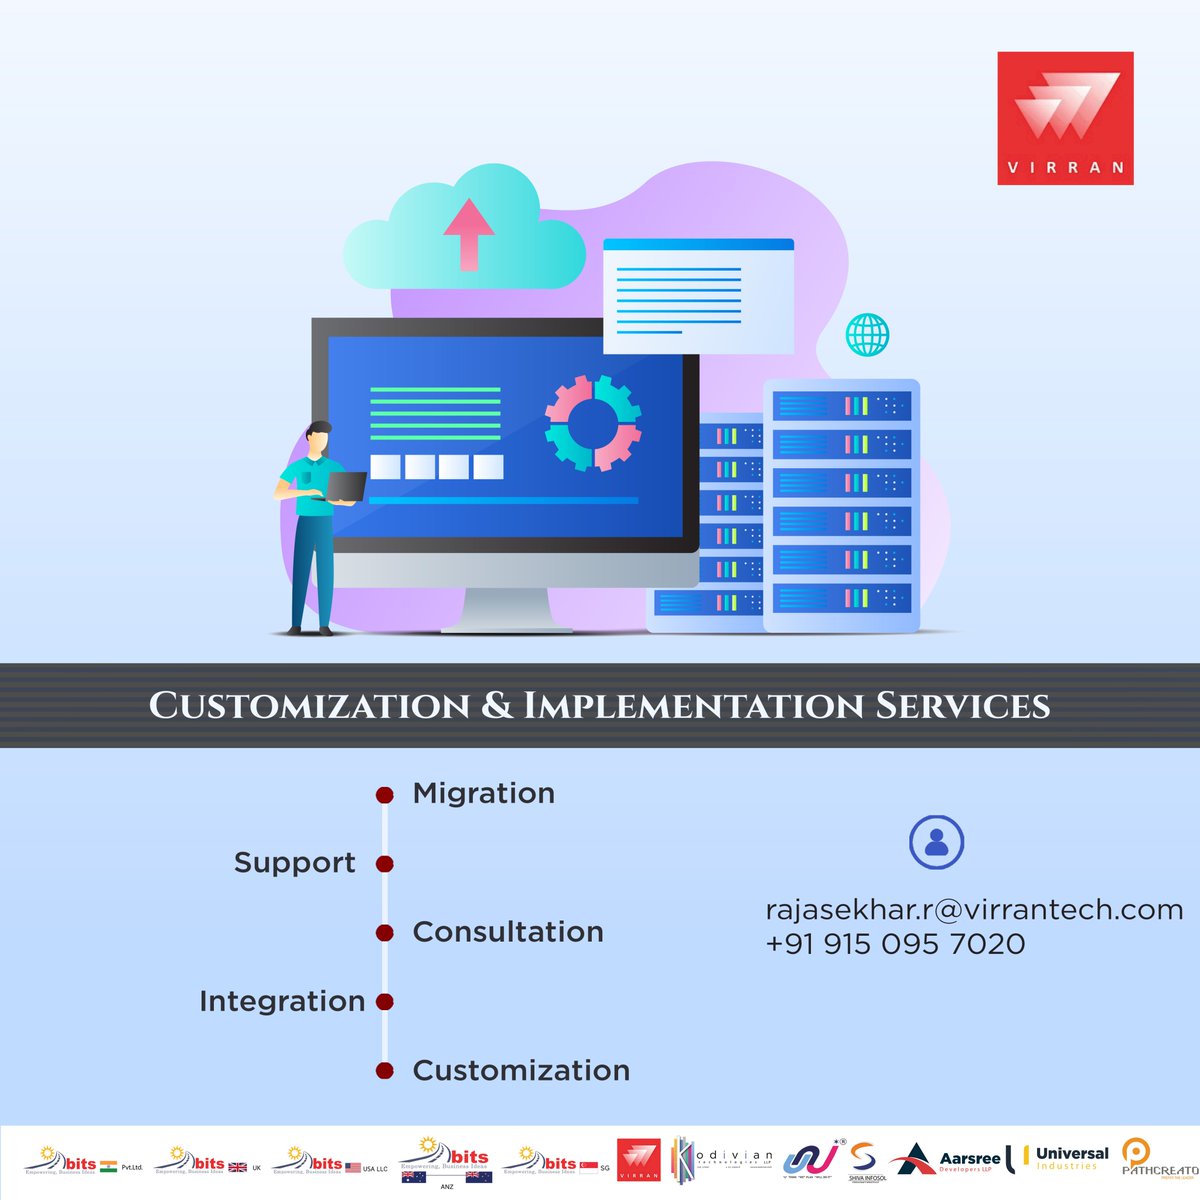 Our Customization & Implementation services #virran #ssgroupofcompanies #ssgroup #customization #implementation #migration #support #consultation #integration #customization